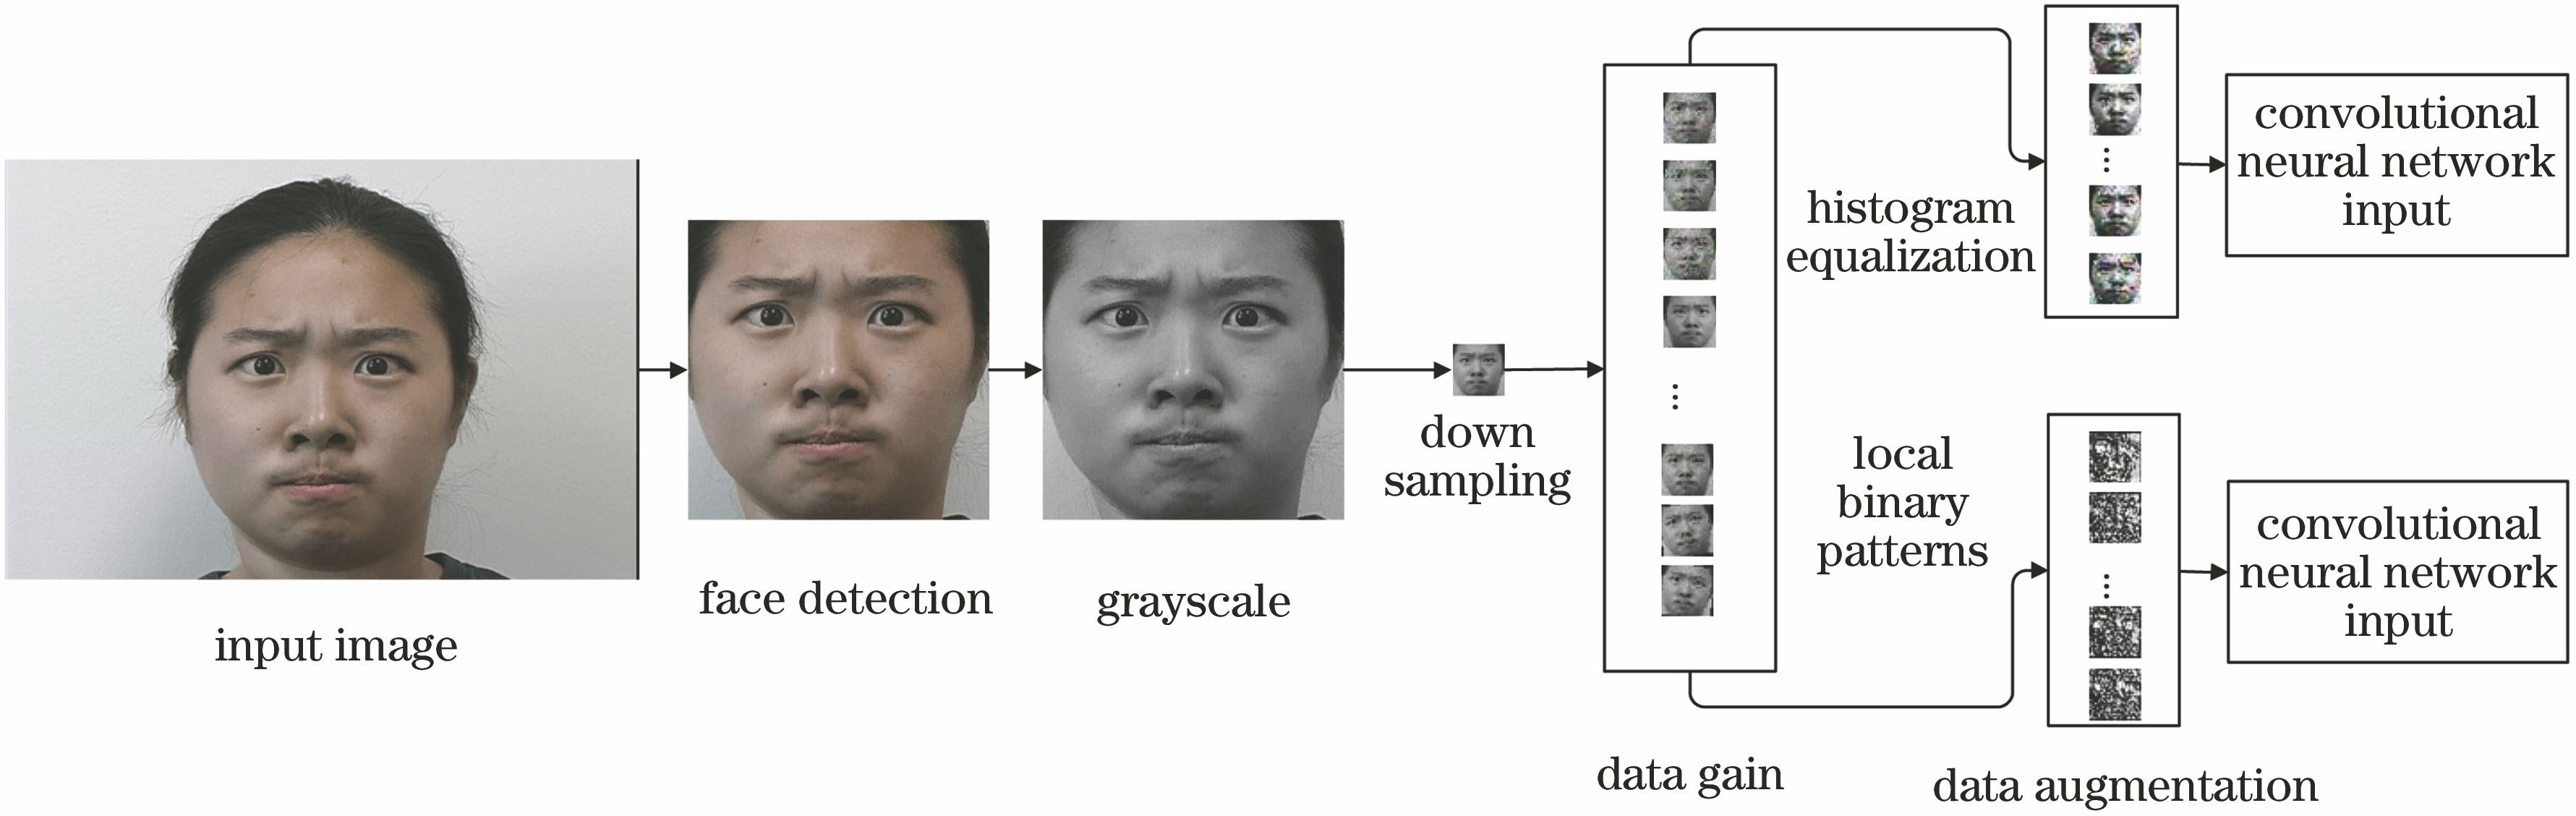 Pipeline of the facial expression preprocessing